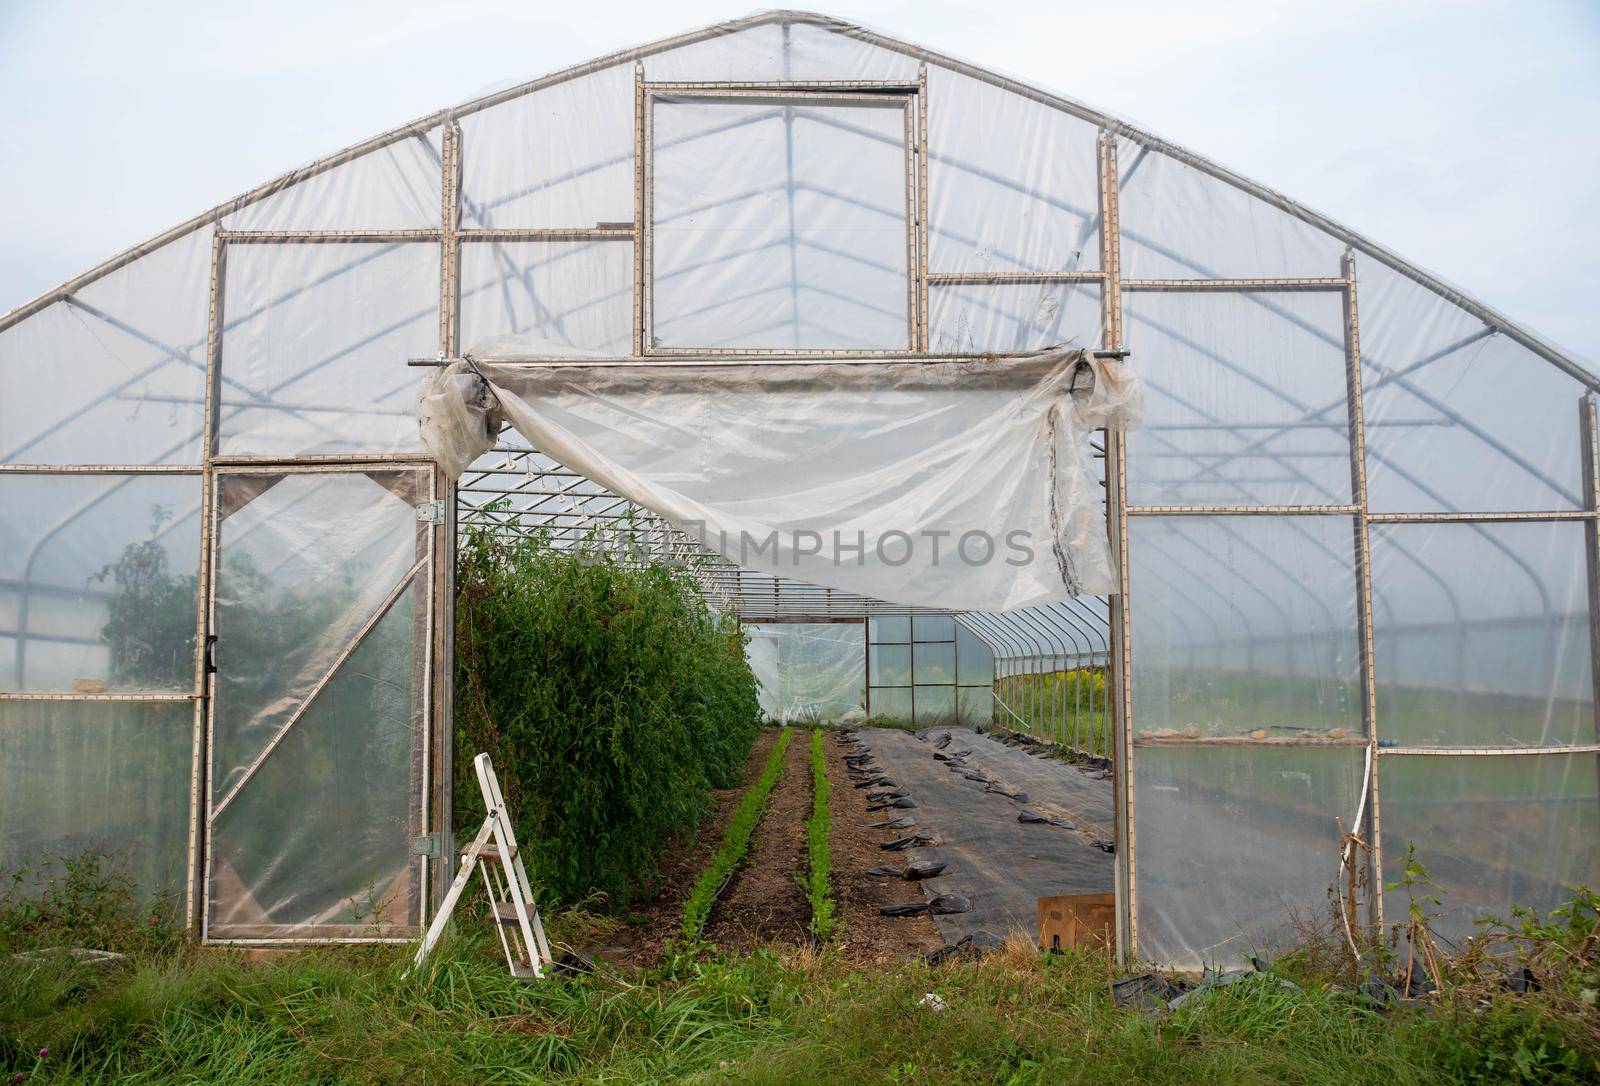 Tomato plants and cilantro grow inside a greenhouse on an organic vegetable farm. Open door and garden step ladder and ground cover are visible, green grass foreground in natural overcast light, no people, with copy space.